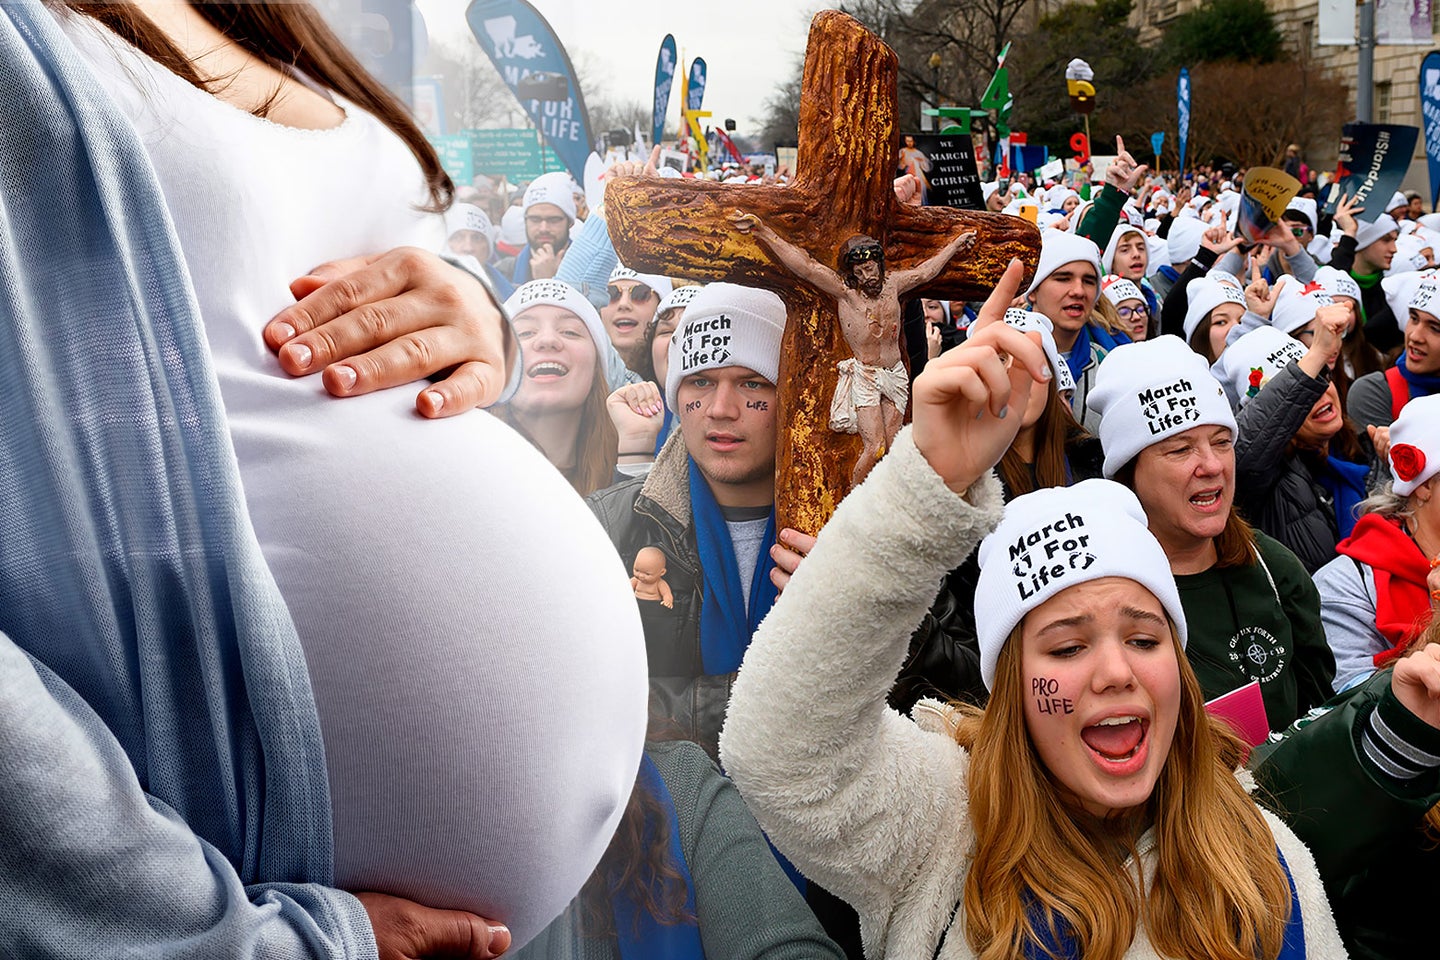 Growing movement undermines pregnant women’s rights as citizens